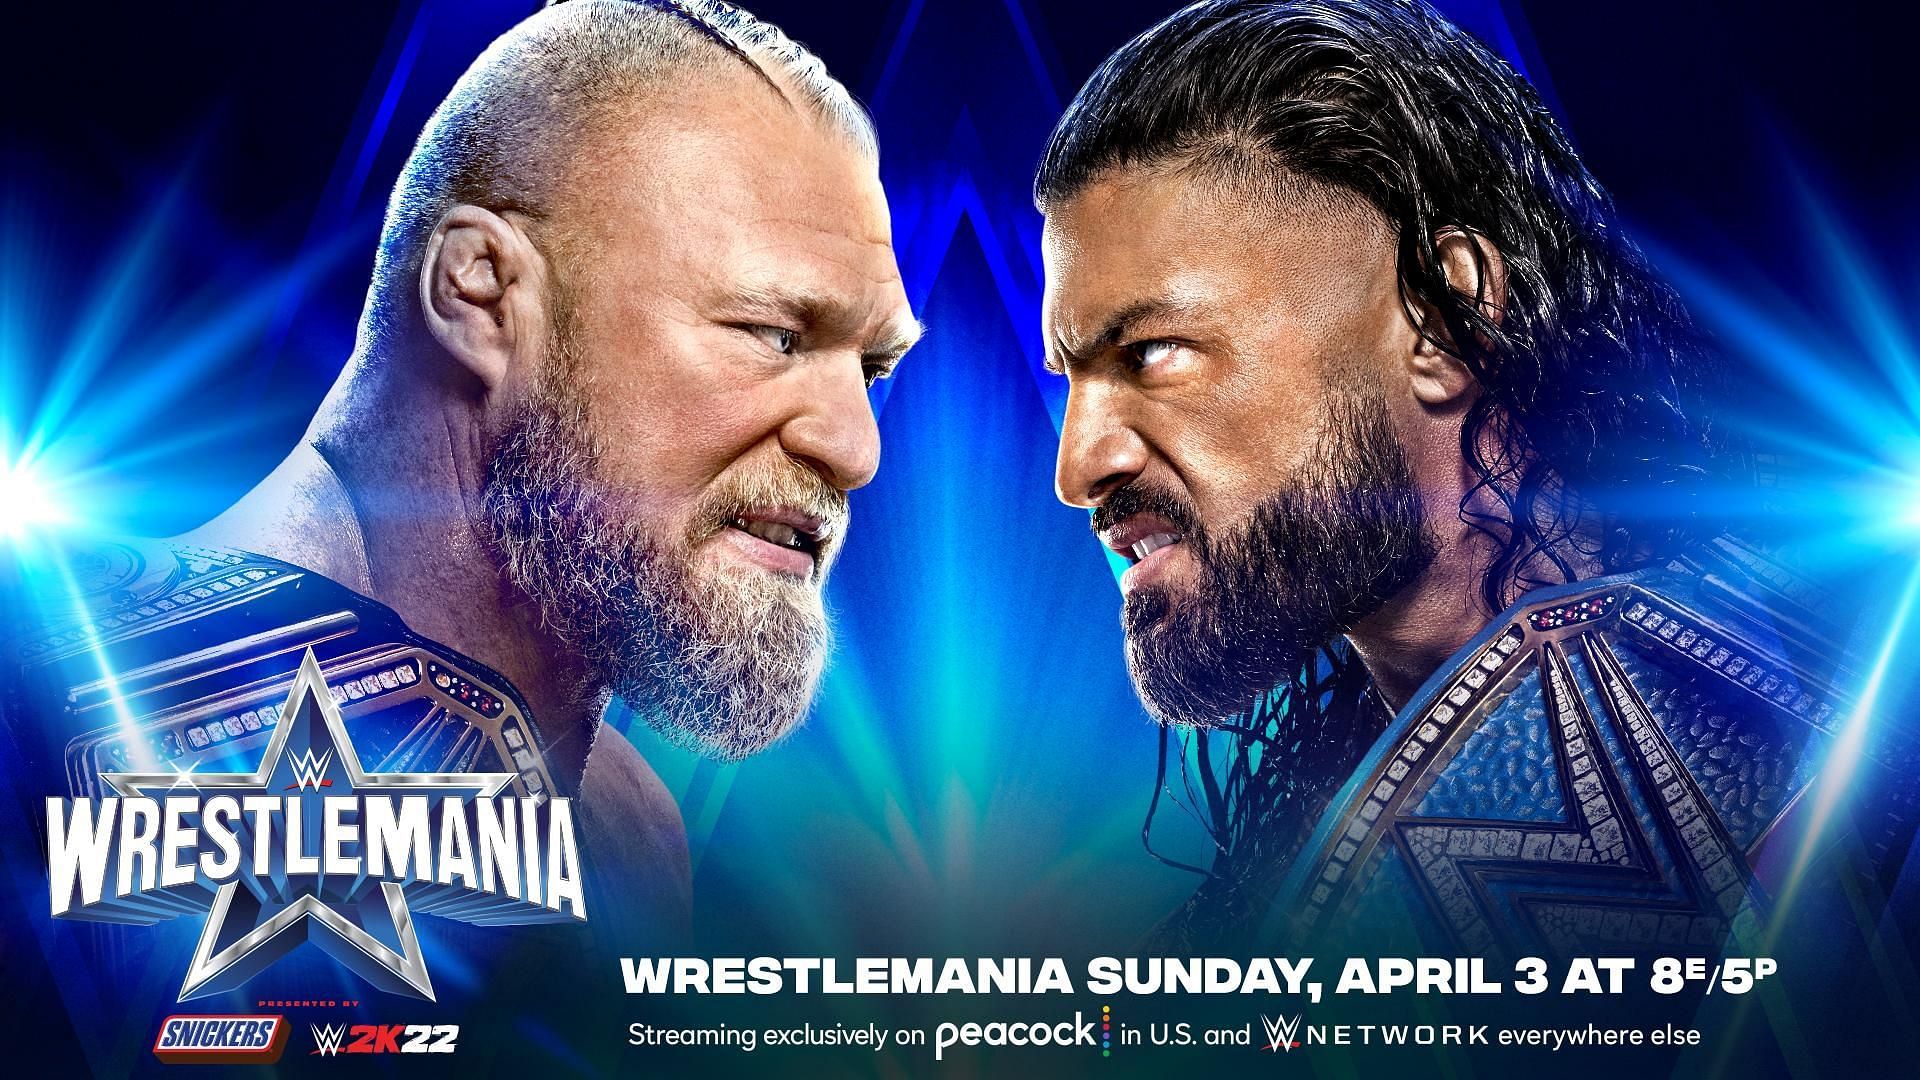 Brock Lesnar and Roman Reigns will collide in a Championship Unification Match at WrestleMania